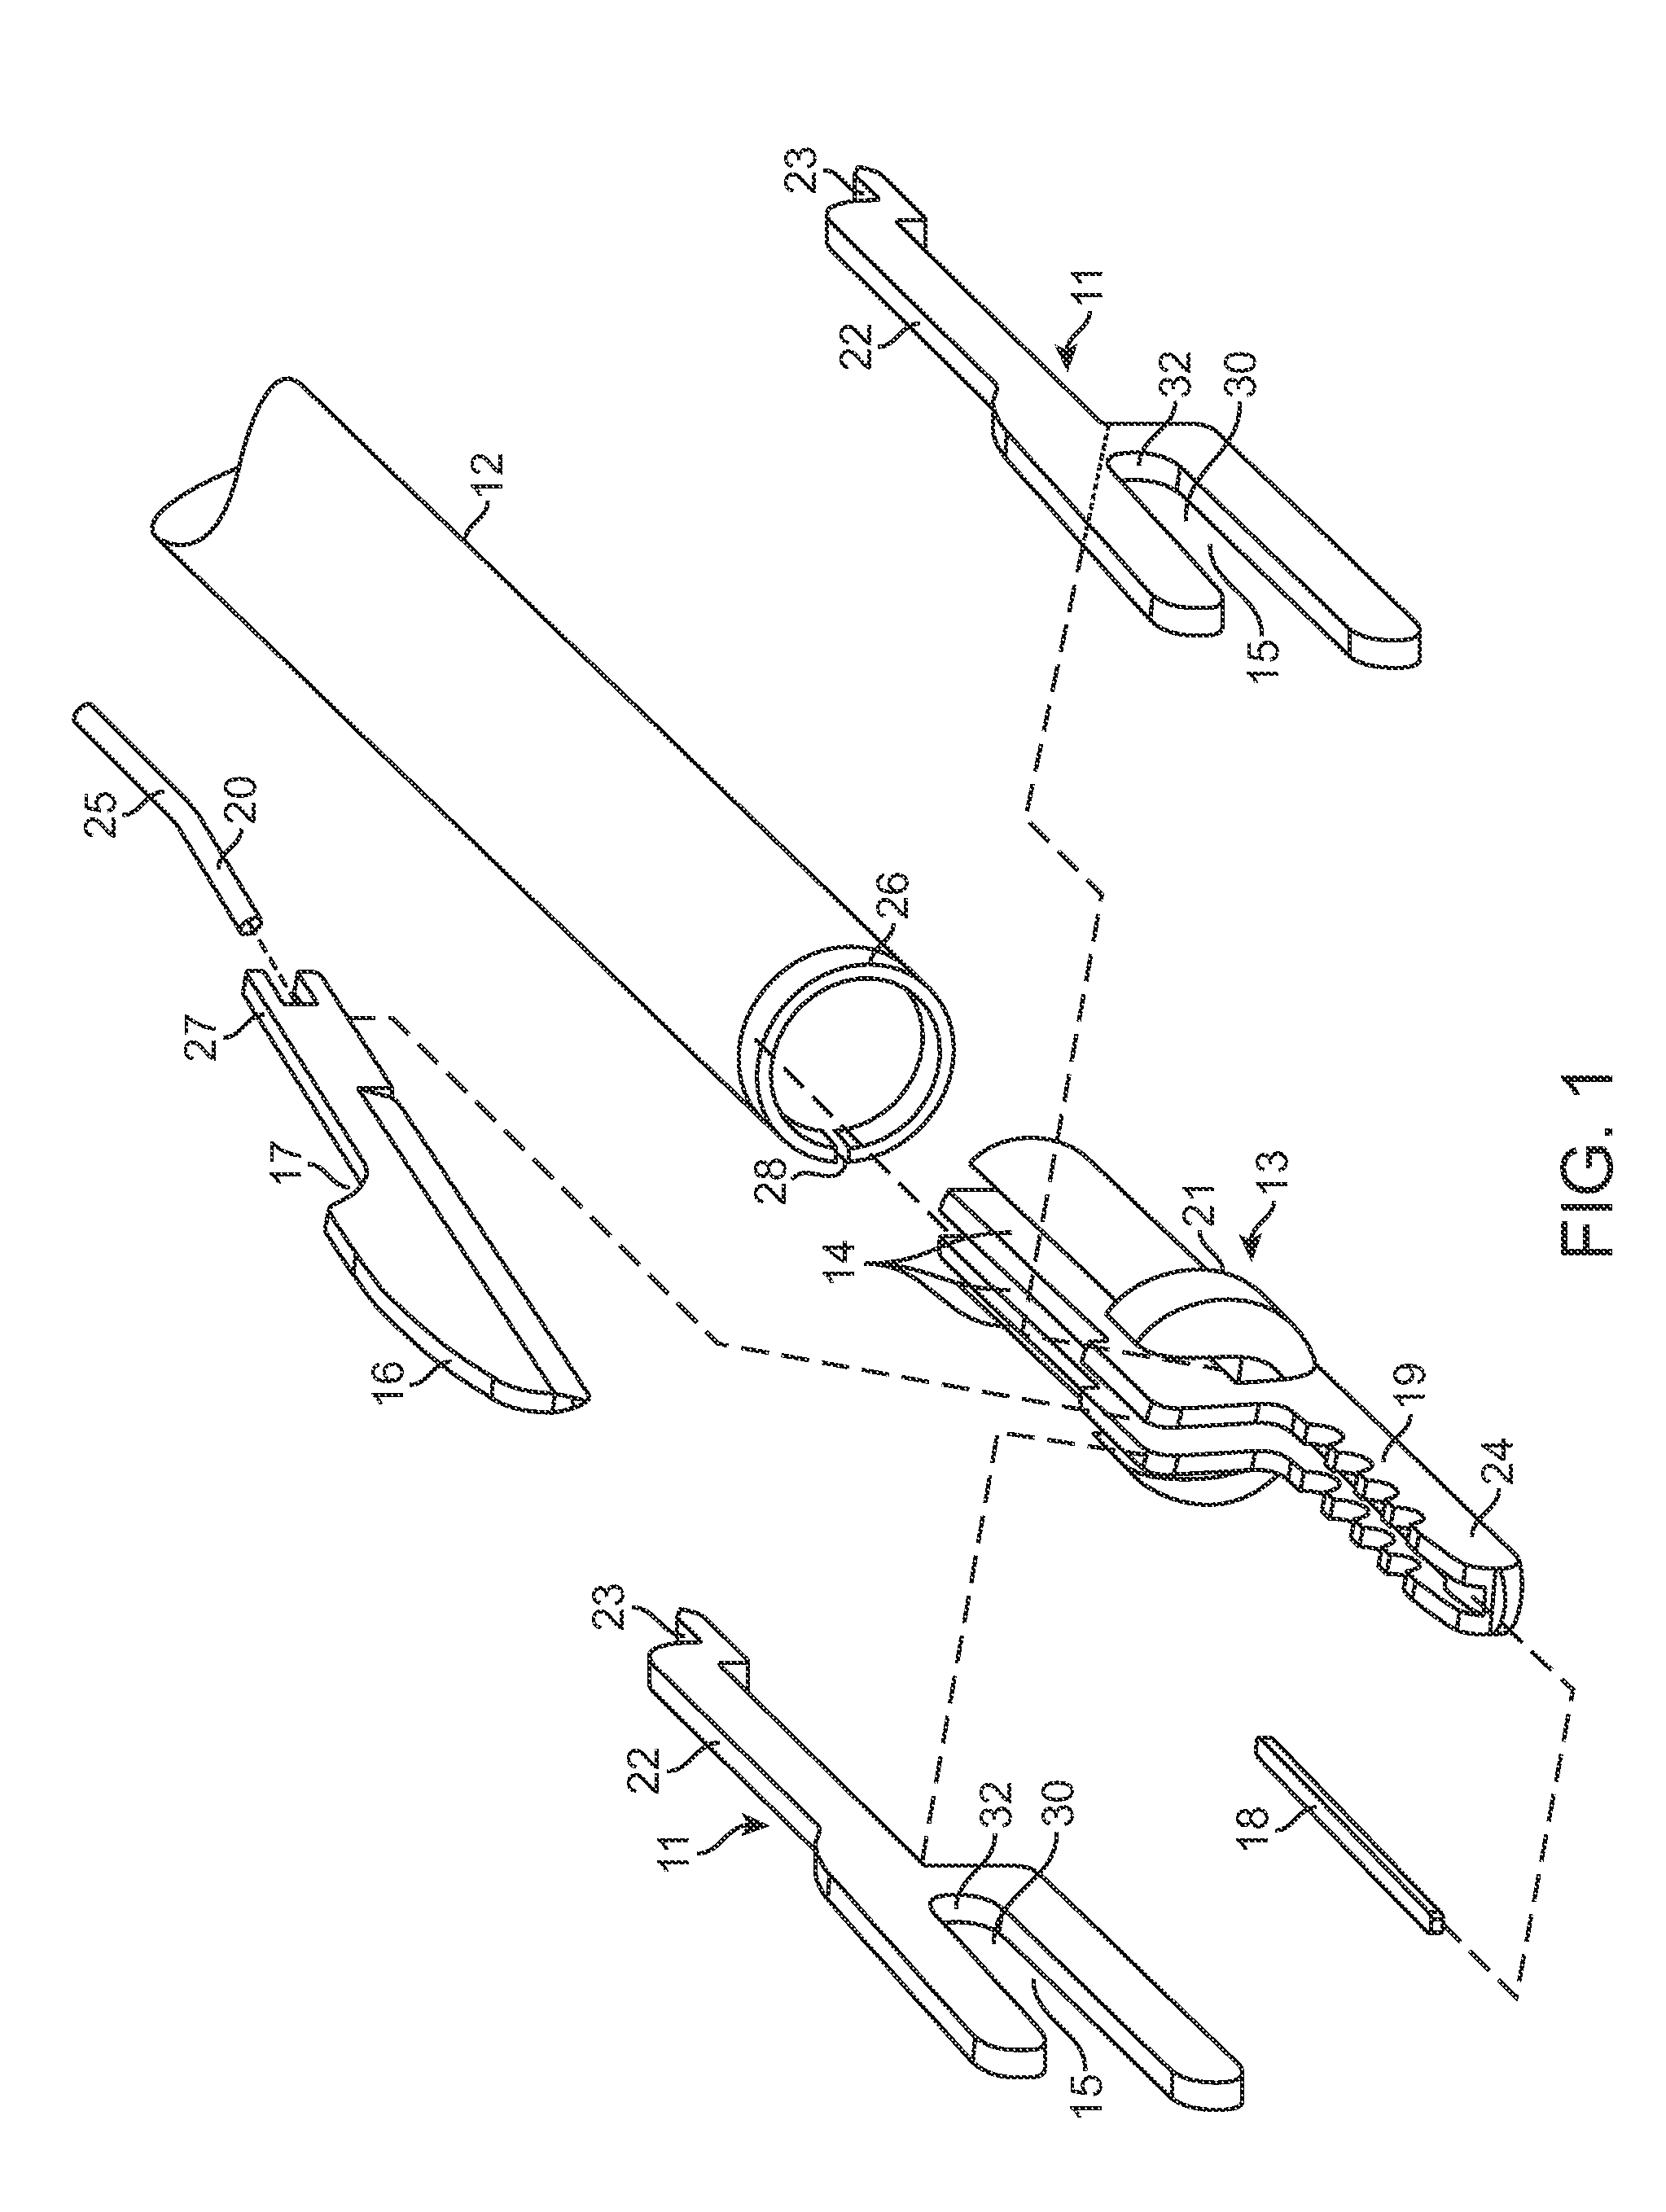 Integrated vessel ligator and transector